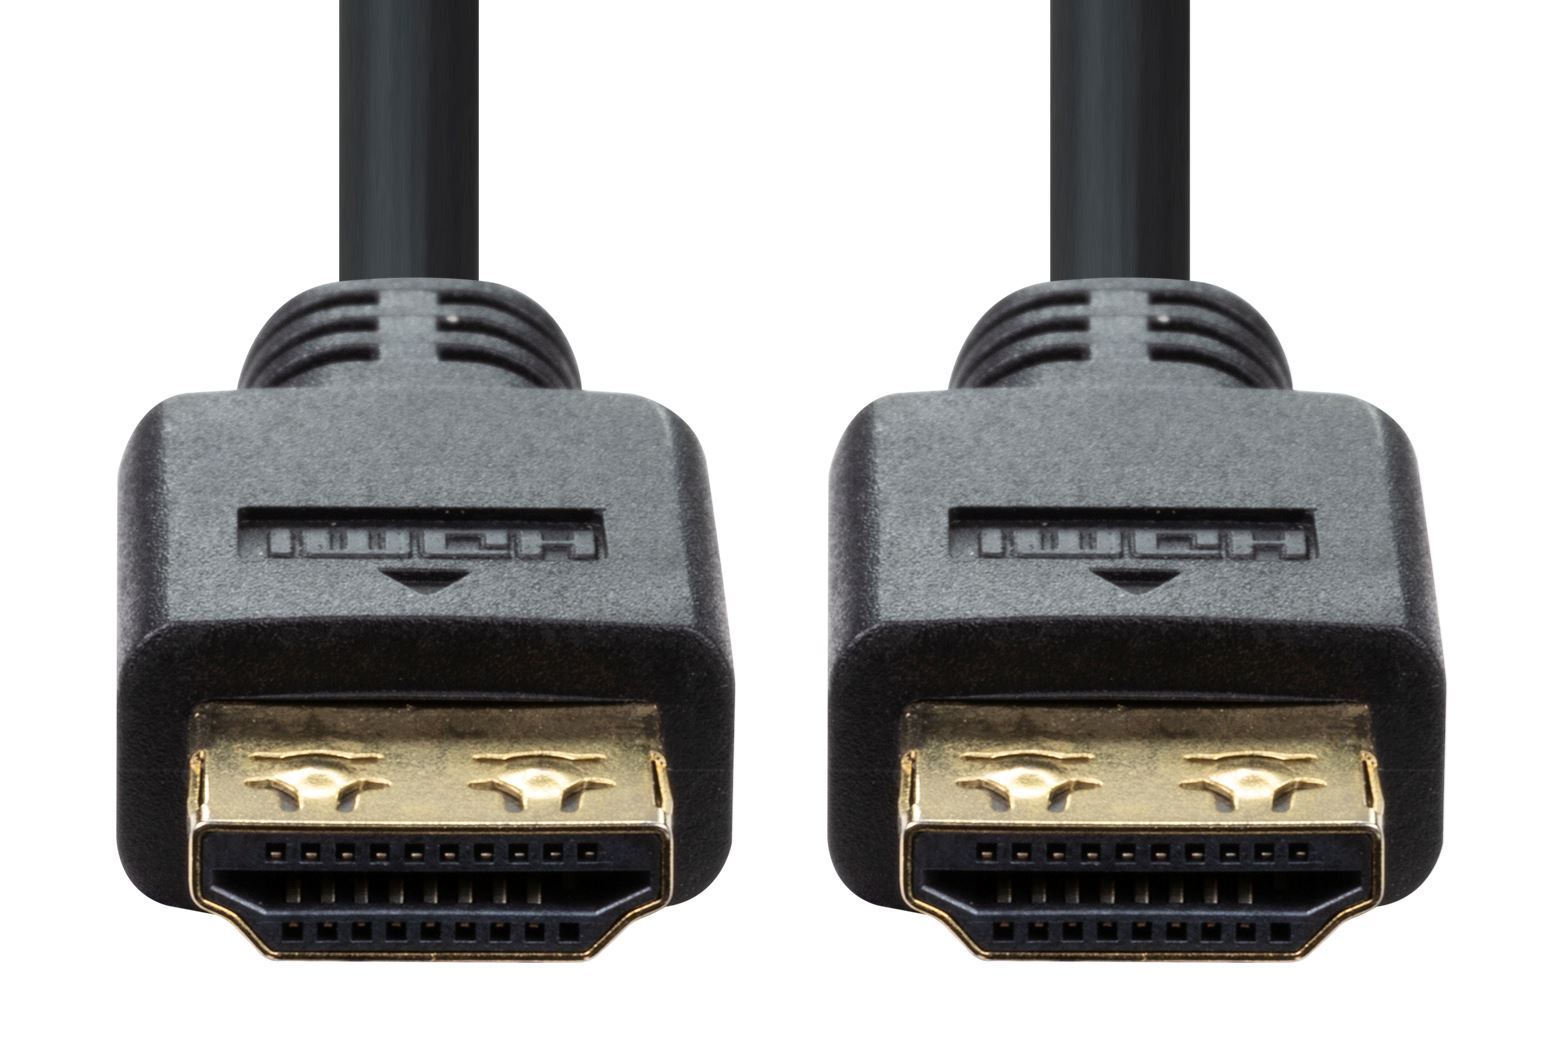 DYNAMIX_7.5m_HDMI_High_Speed_18Gbps_Flexi_Lock_Cable_with_Ethernet._Max_Res:_4K2K@30/60Hz._32_Audio_channels._10/12bit_colour_depth._Supports_CEC_2.0,_3D,_ARC,_Ethernet_2x_simultaneous_video_streams. 748